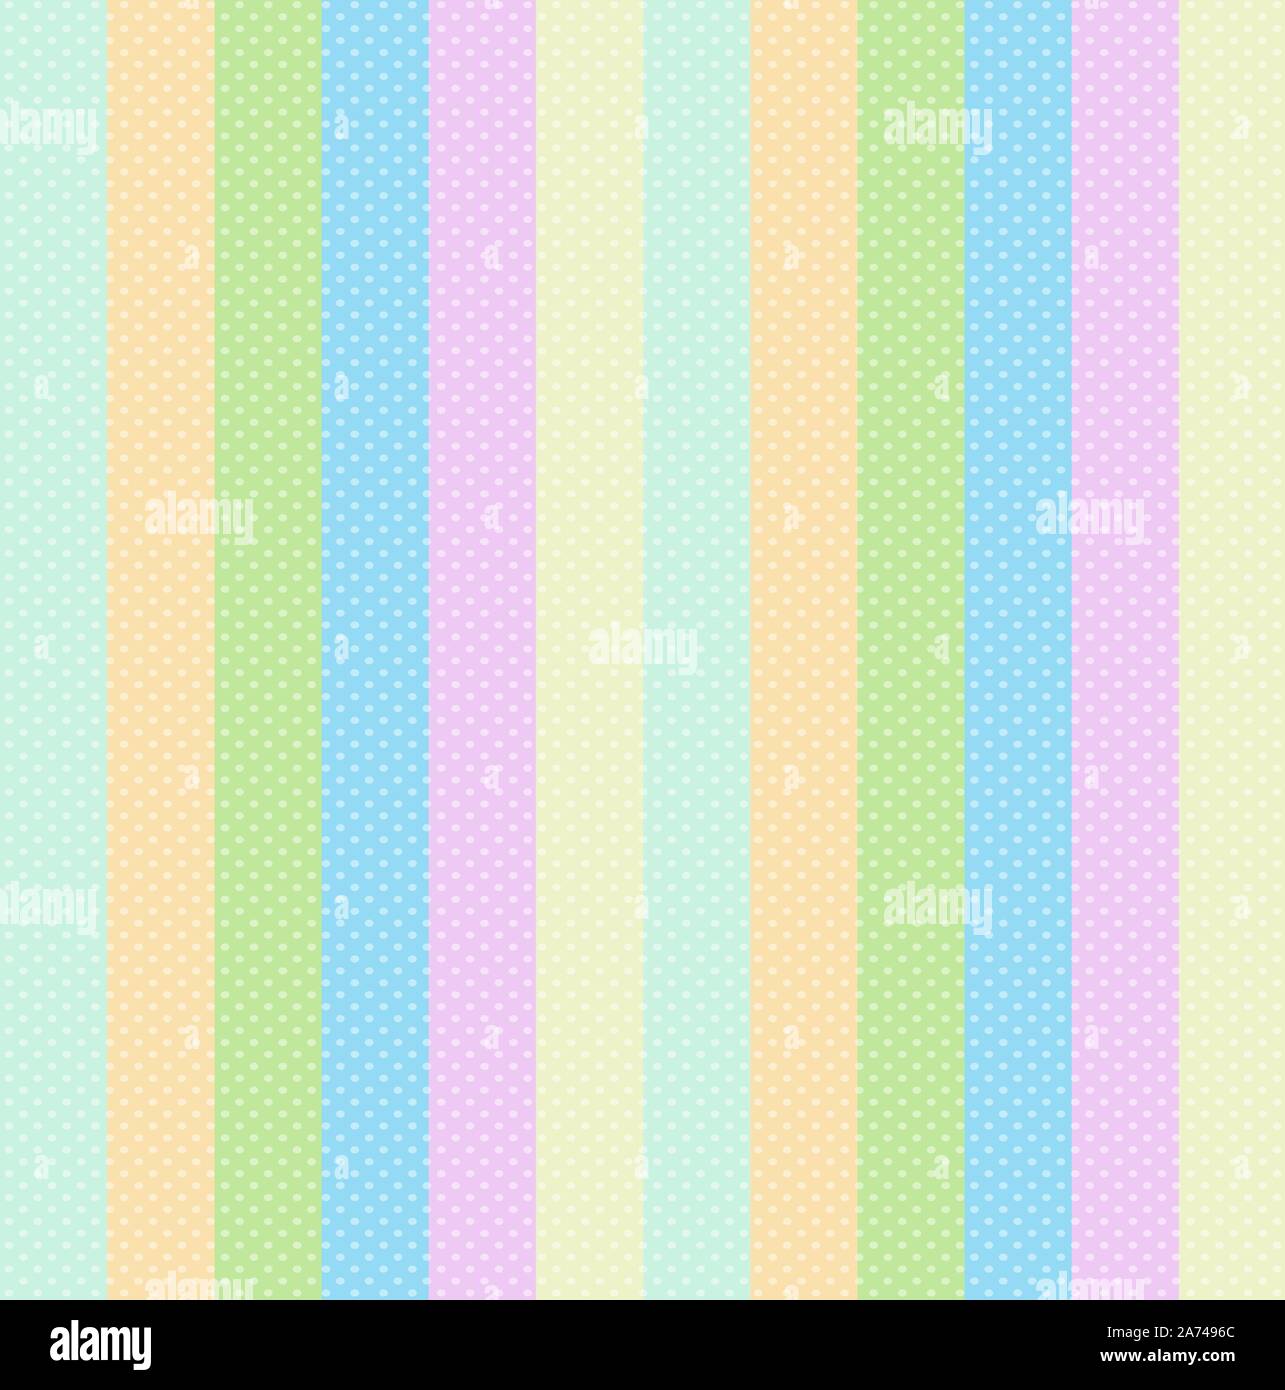 Stripe Background of Pastel Baby Colors and Polka Dots. Seamless Vertical Pinstripe Pink Blue Green Orange and Yellow Palette for Wallpaper Scrapbook, Stock Vector